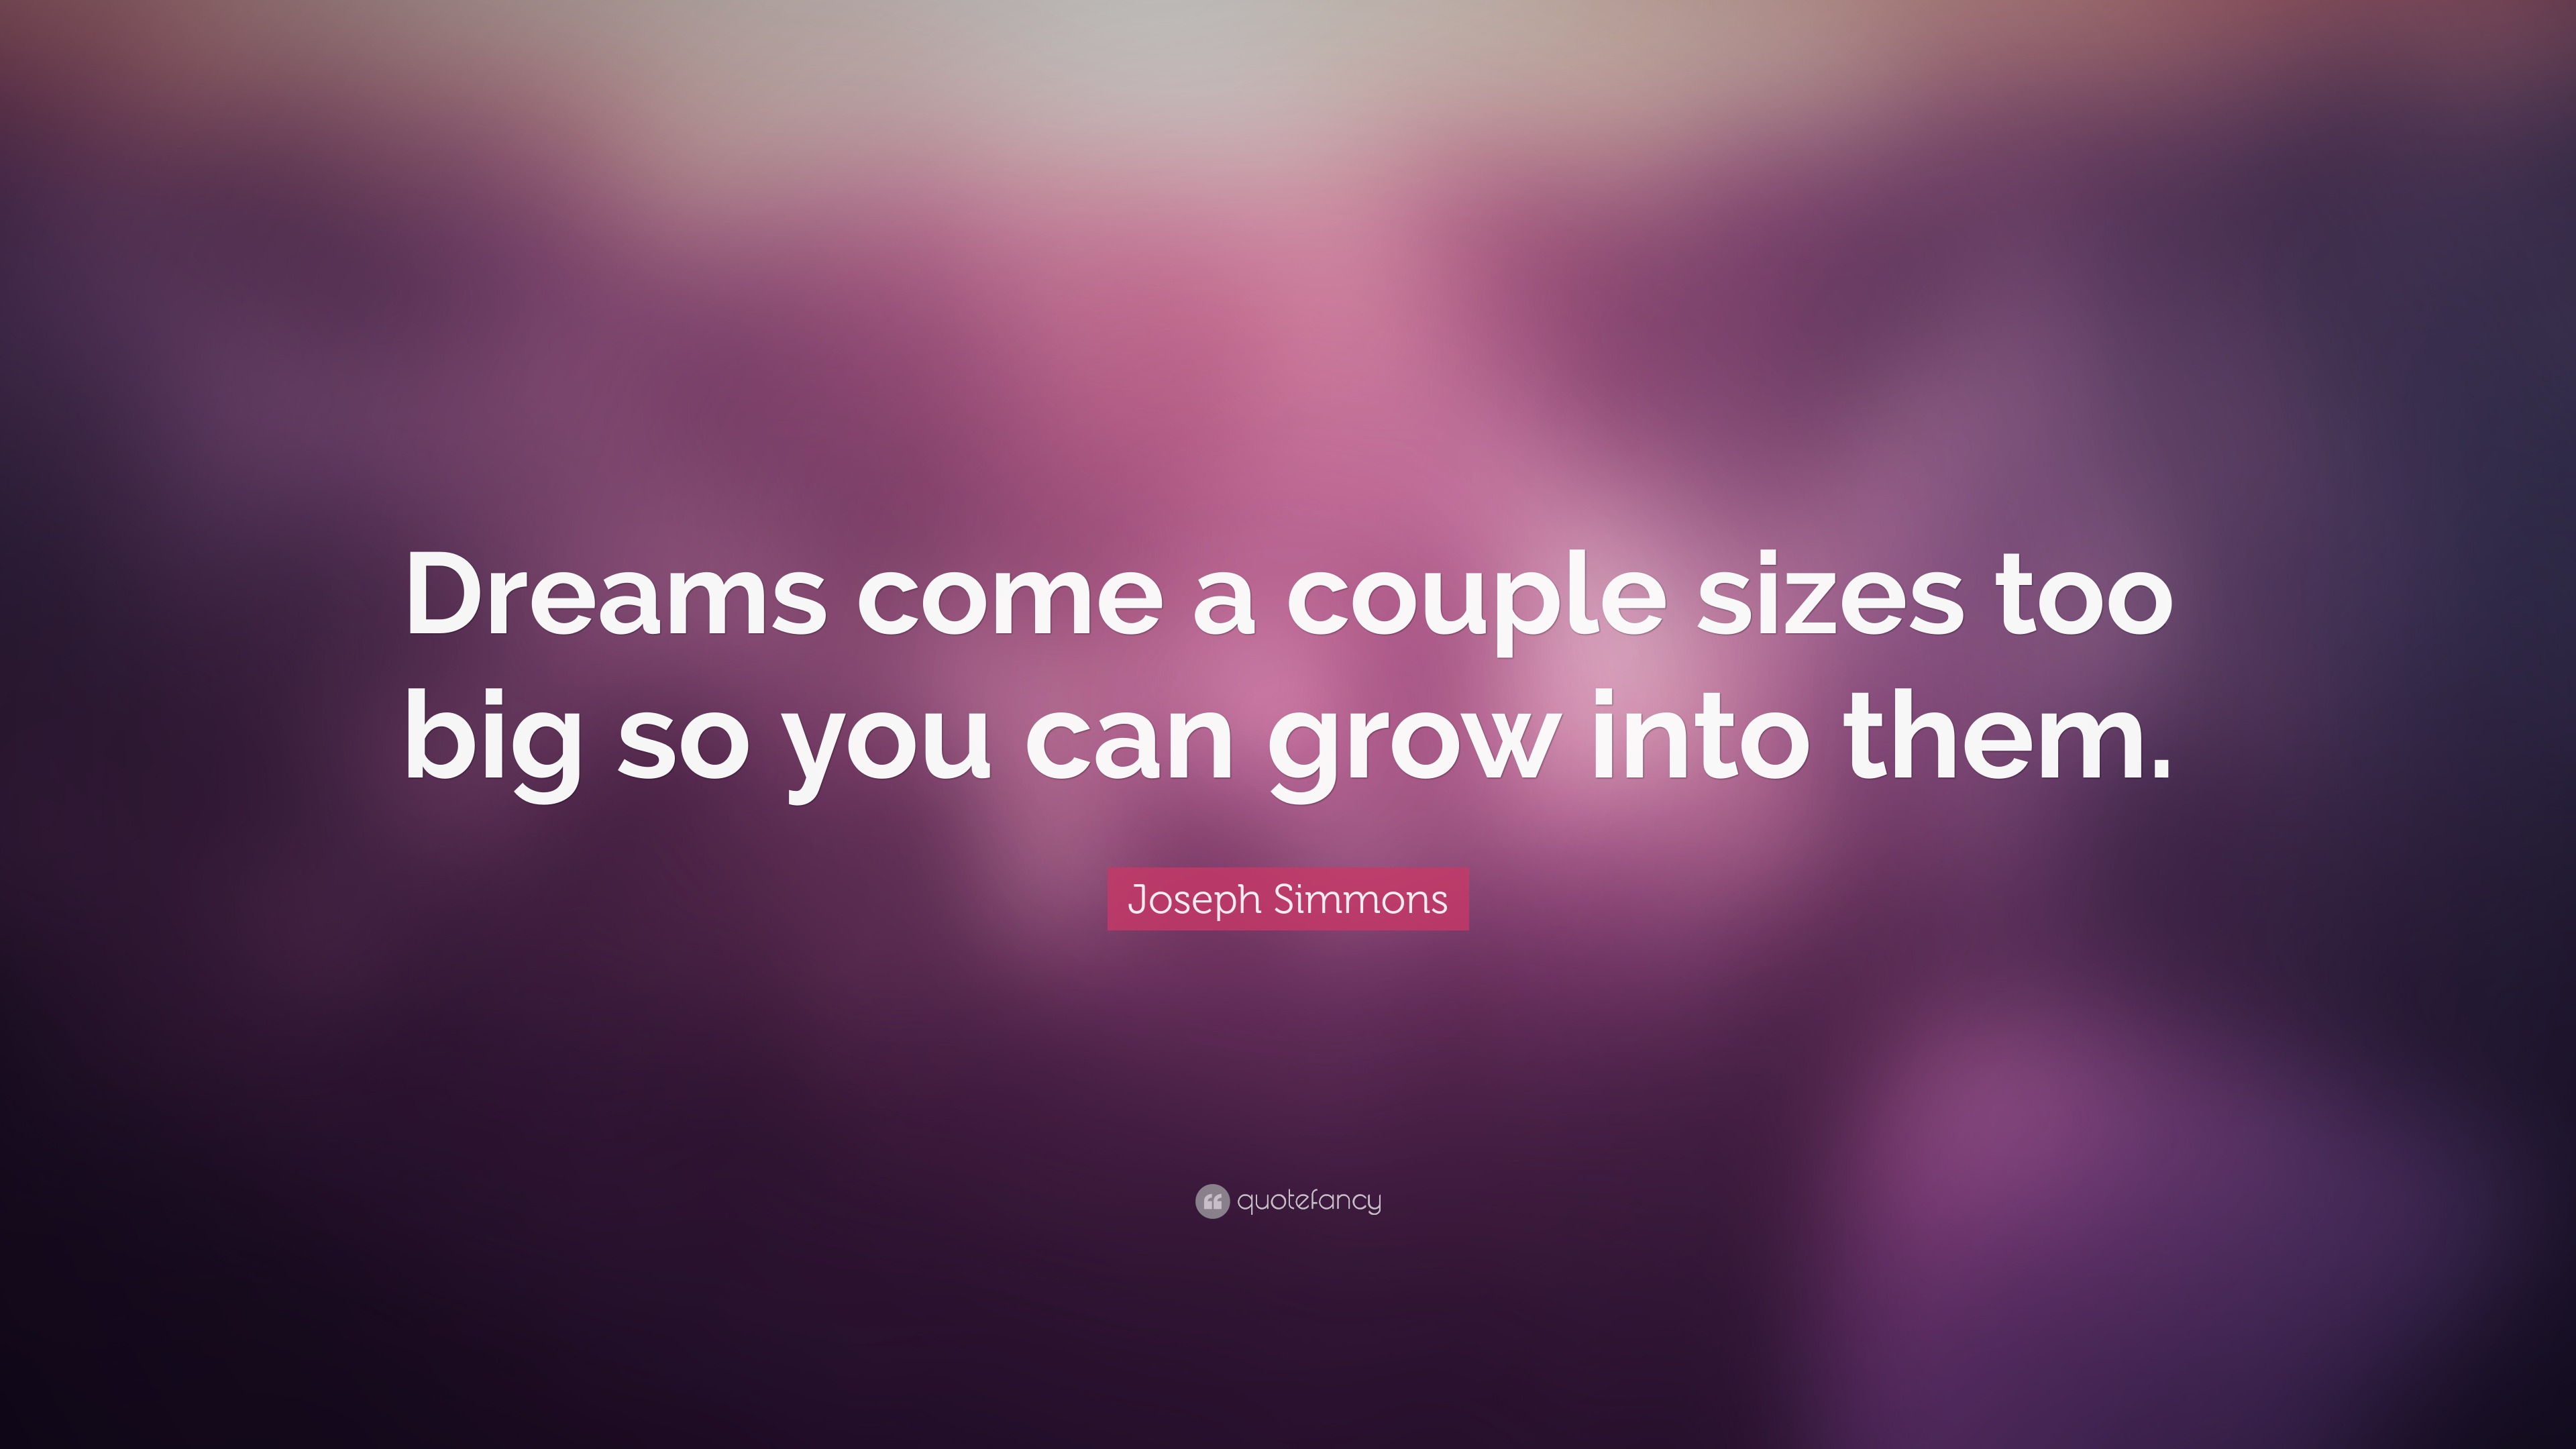 https://quotefancy.com/media/wallpaper/3840x2160/6275531-Joseph-Simmons-Quote-Dreams-come-a-couple-sizes-too-big-so-you-can.jpg